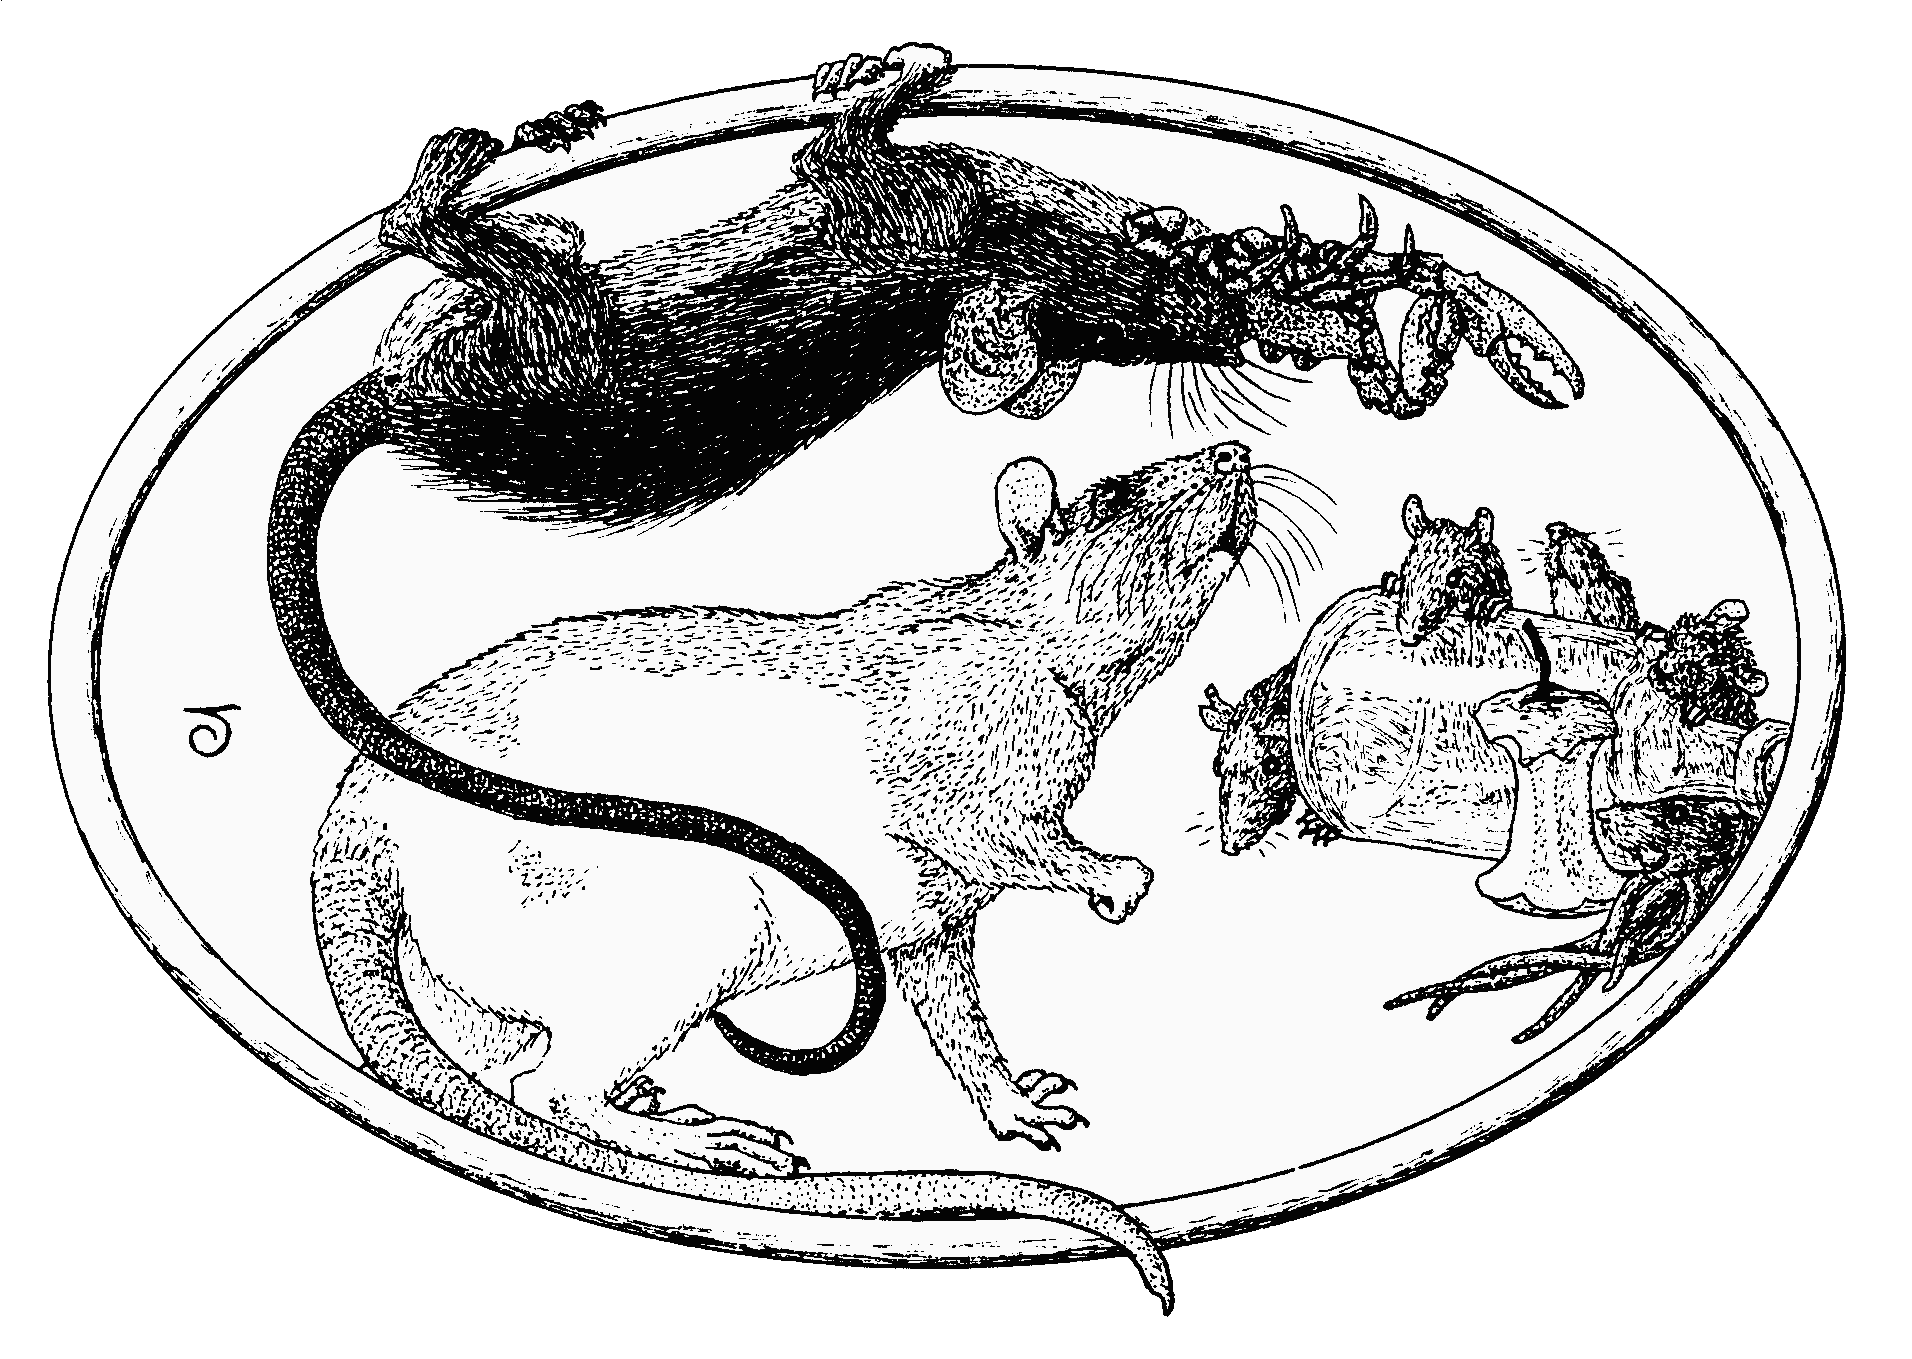 Drawing of ship rat upside-down, clutching crab and watched by bemused fancy rat, with wild Norway rats hiding behind bottle in background